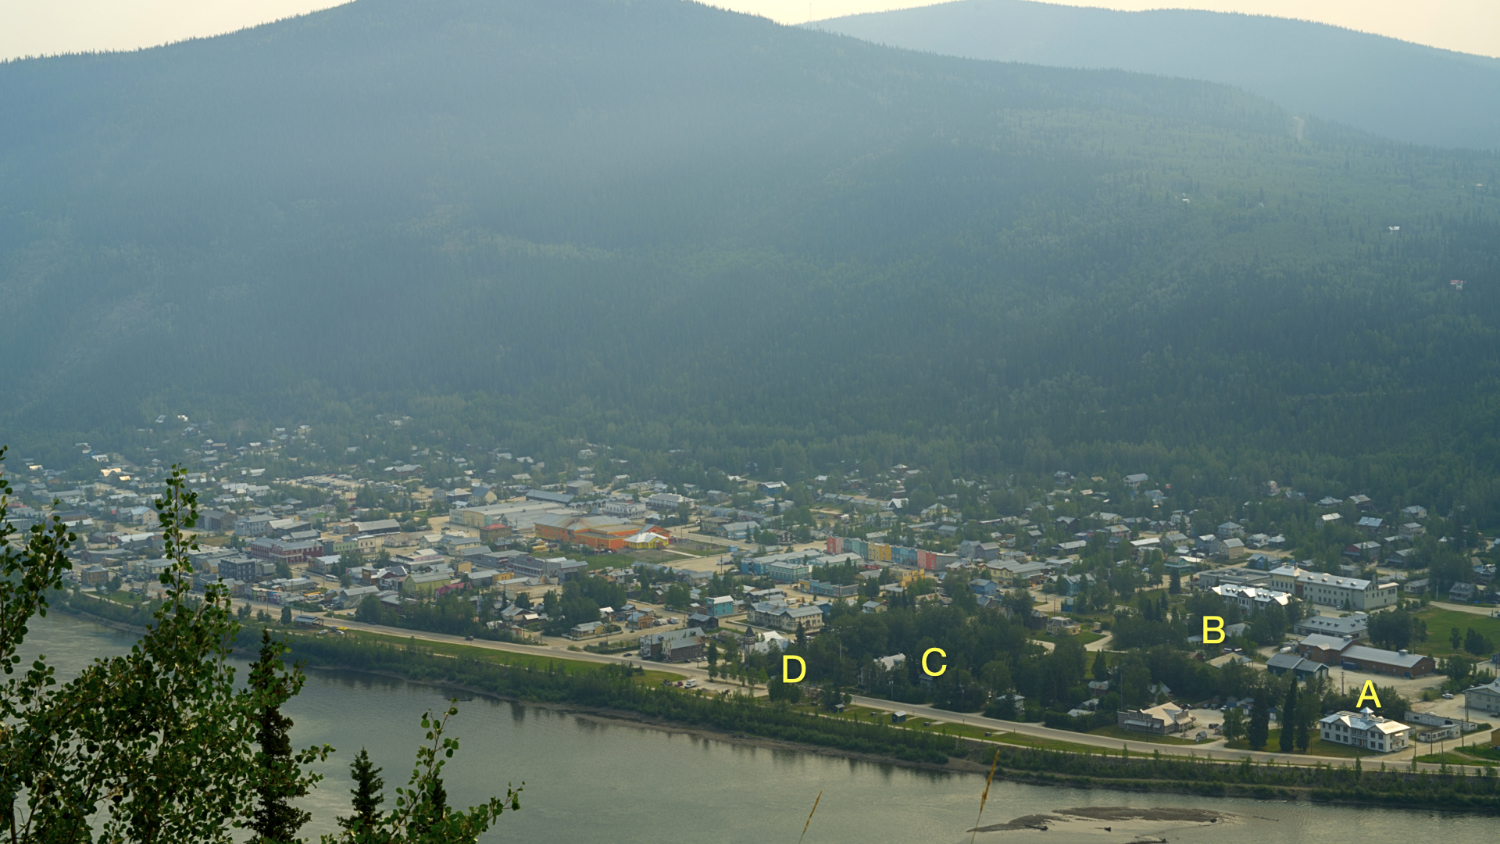 View of Dawson Vity from a hill across the river, showing a concentration of buildings on the river's edge with a mountain behind.